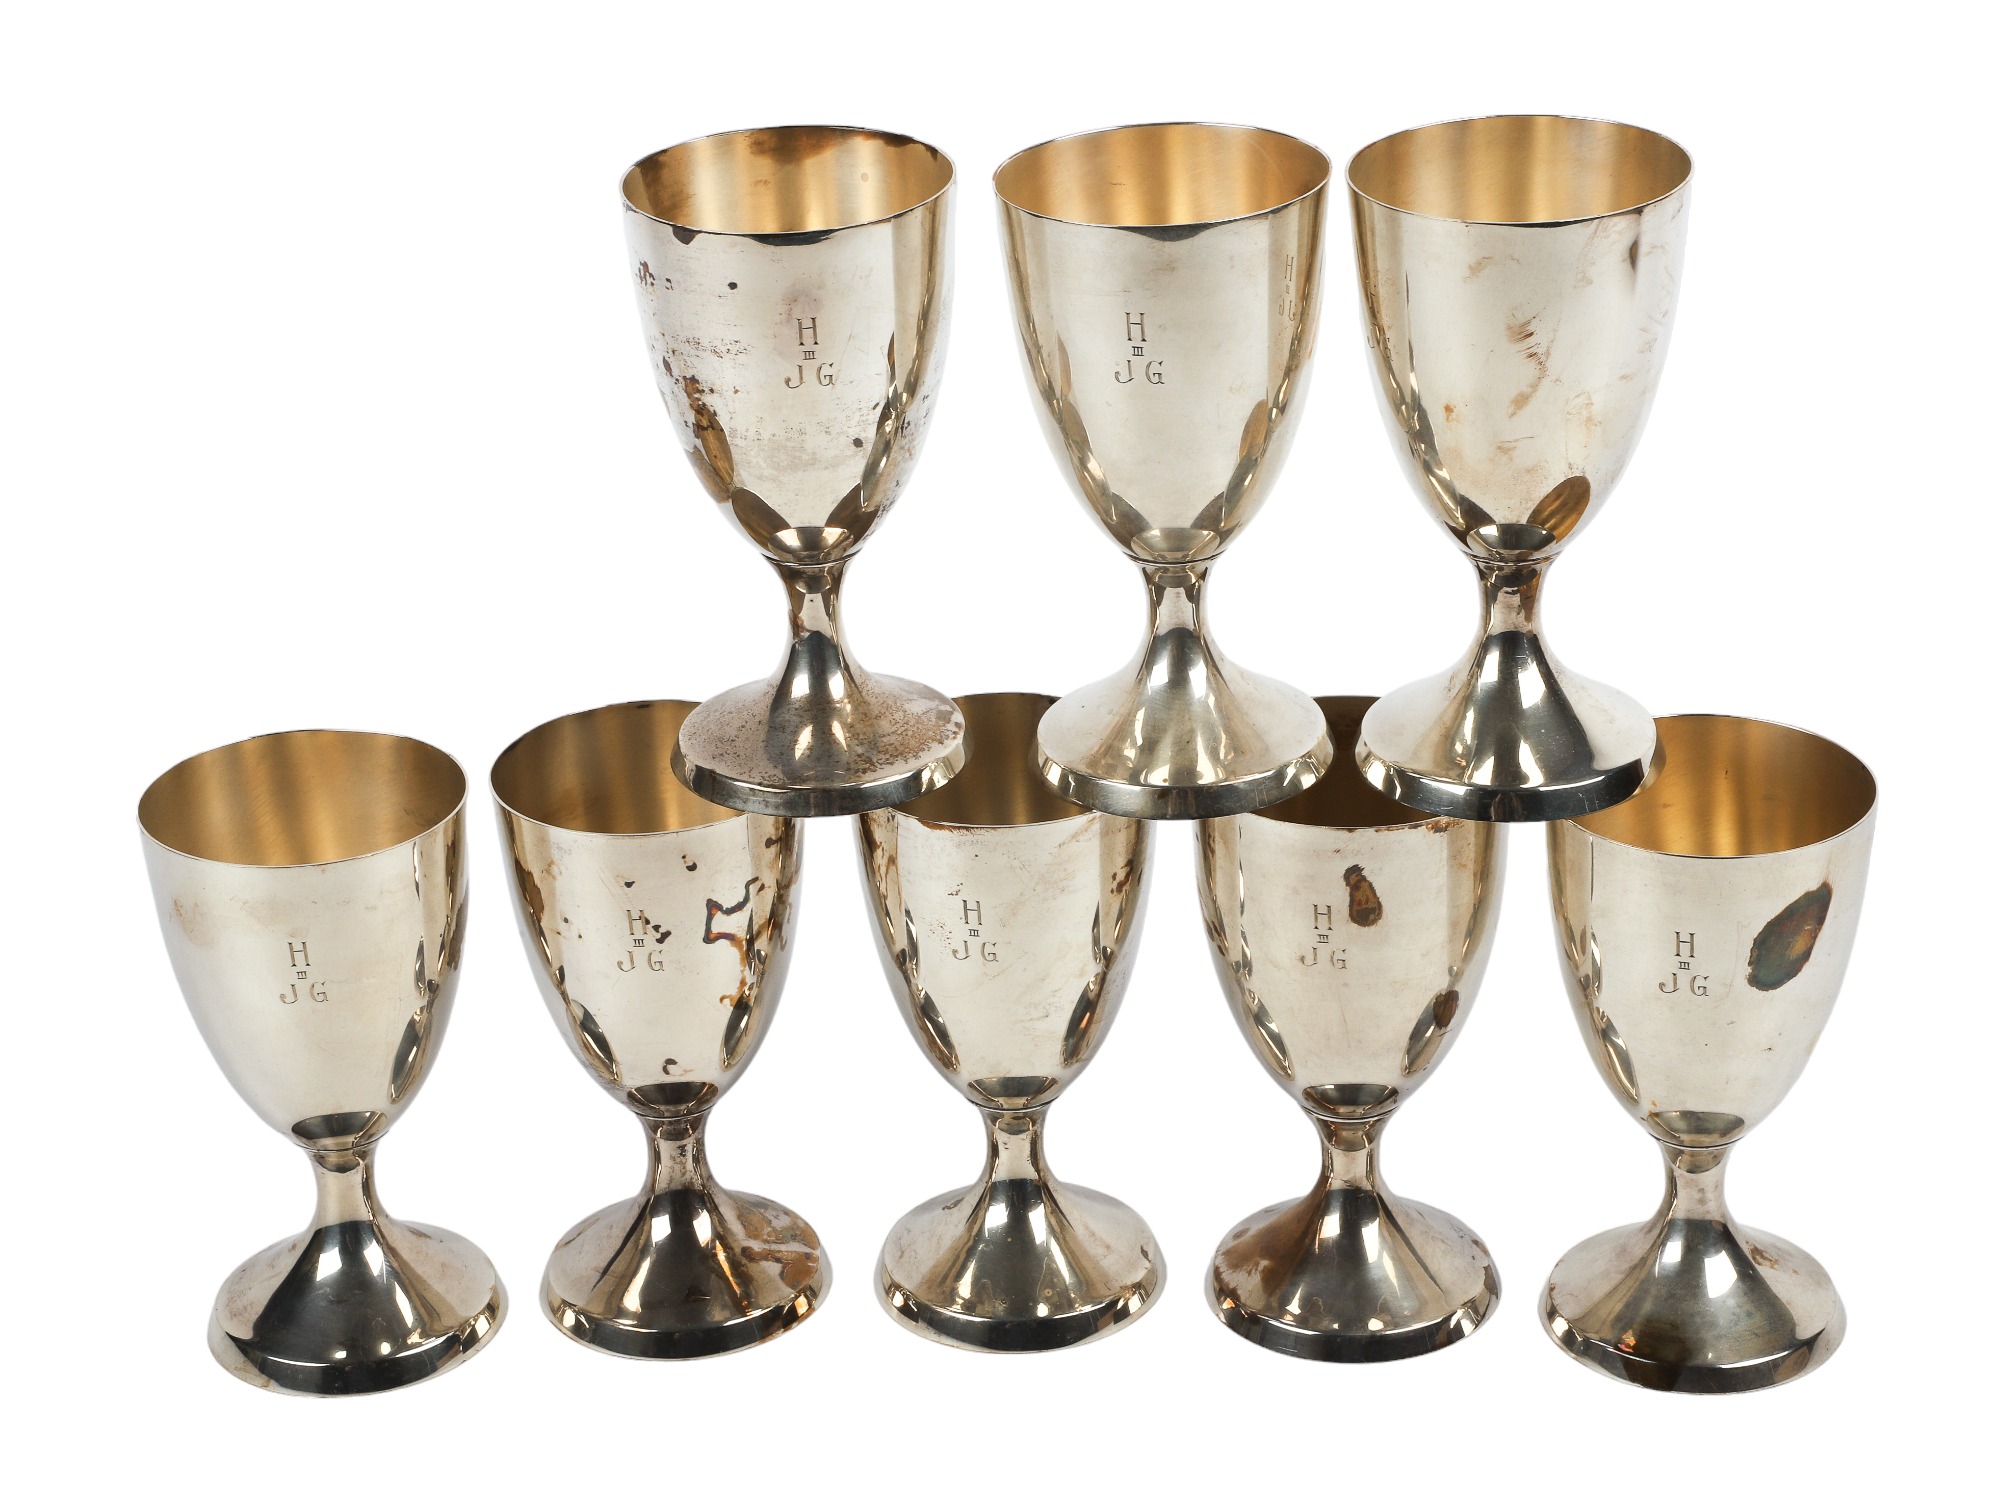  8 Schofield sterling silver goblets  3ca44d